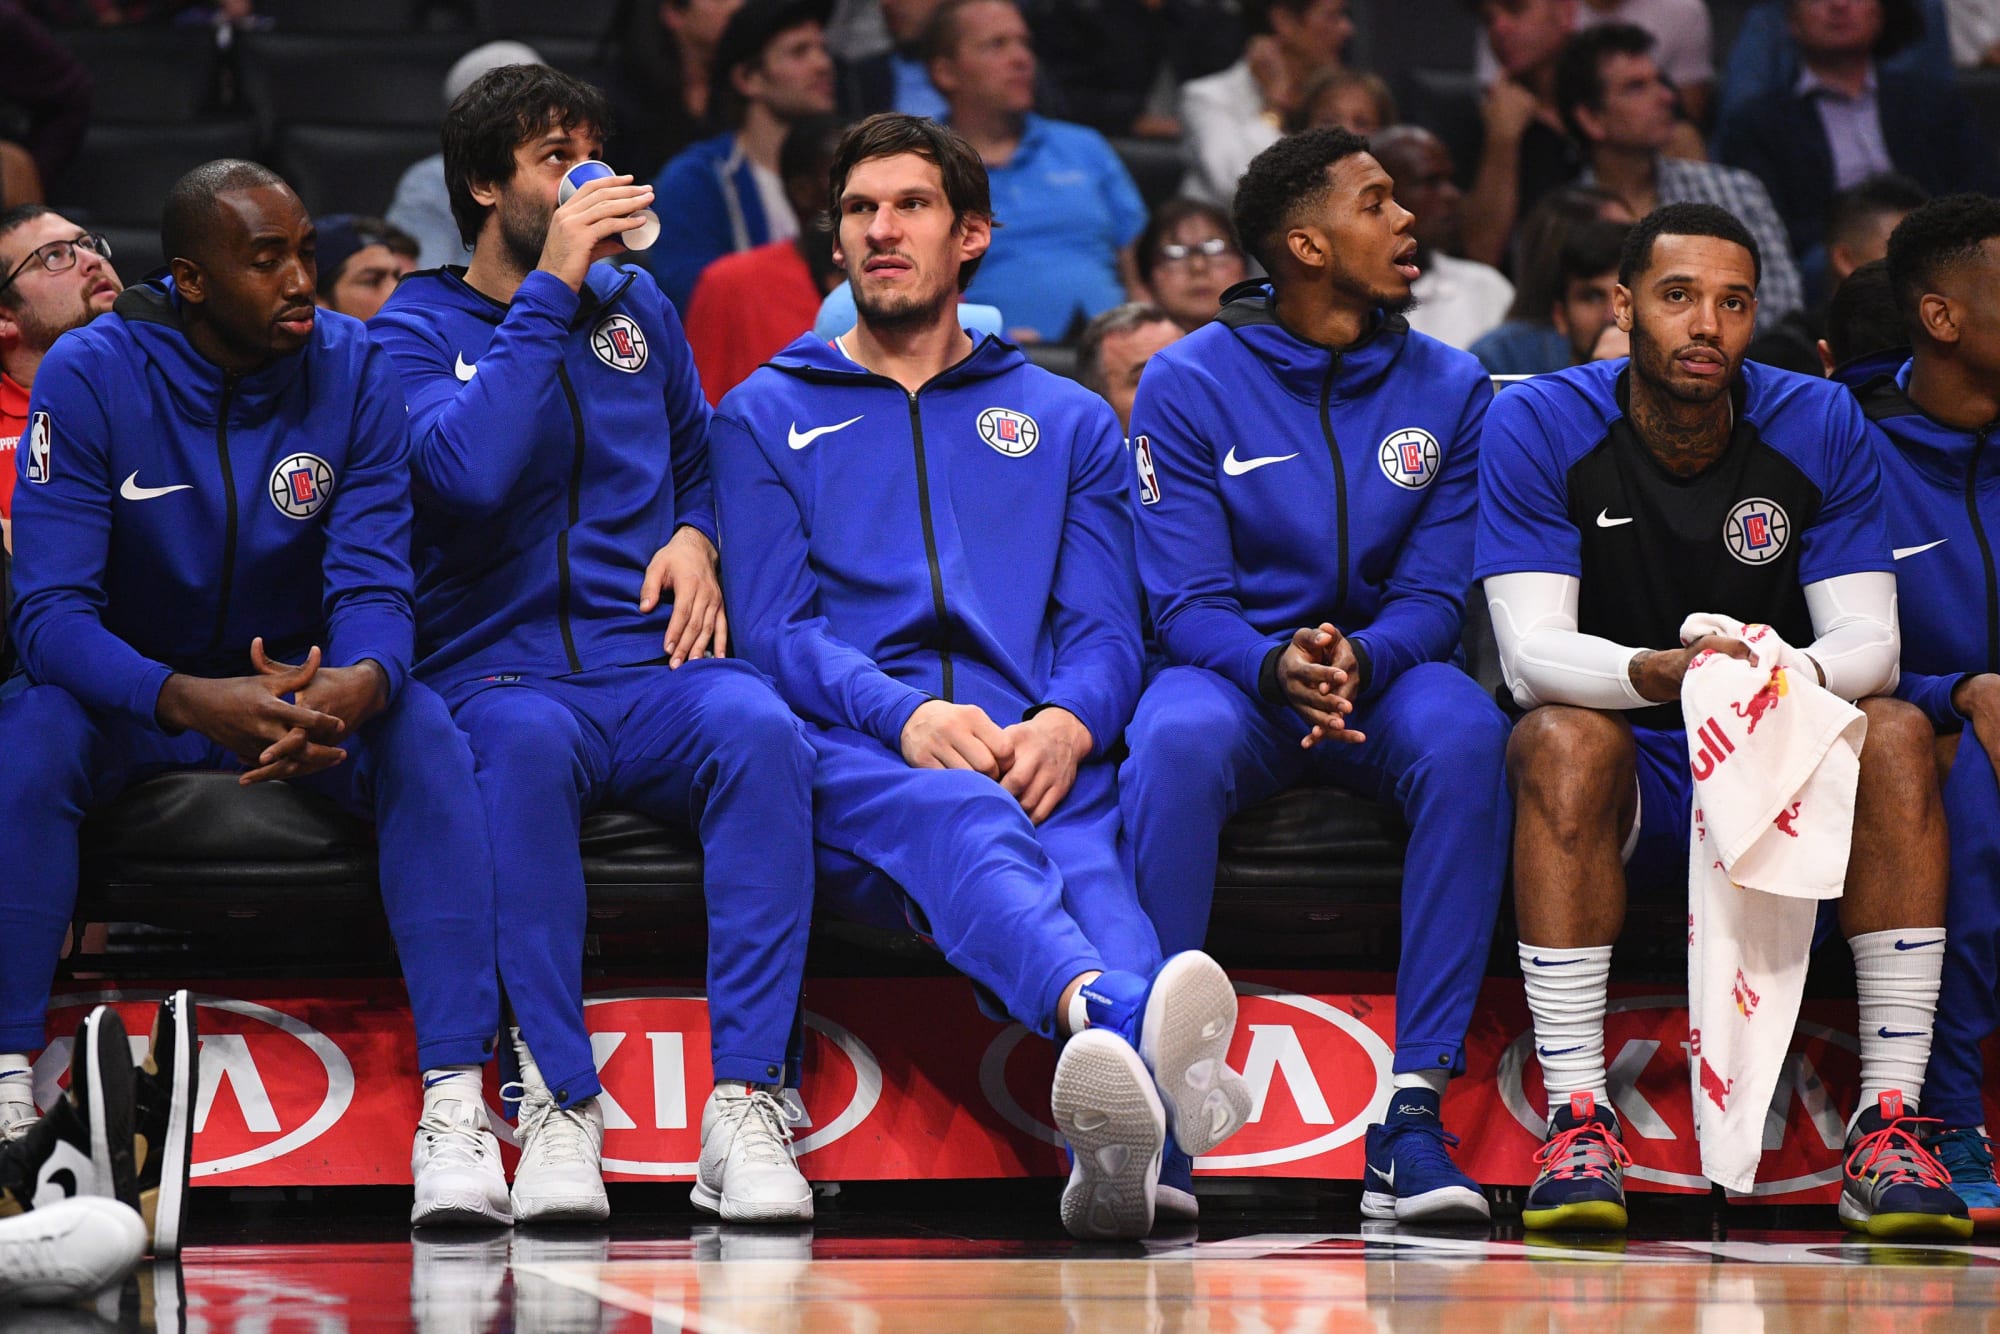 The LA Clippers have the best bench in the NBA this season